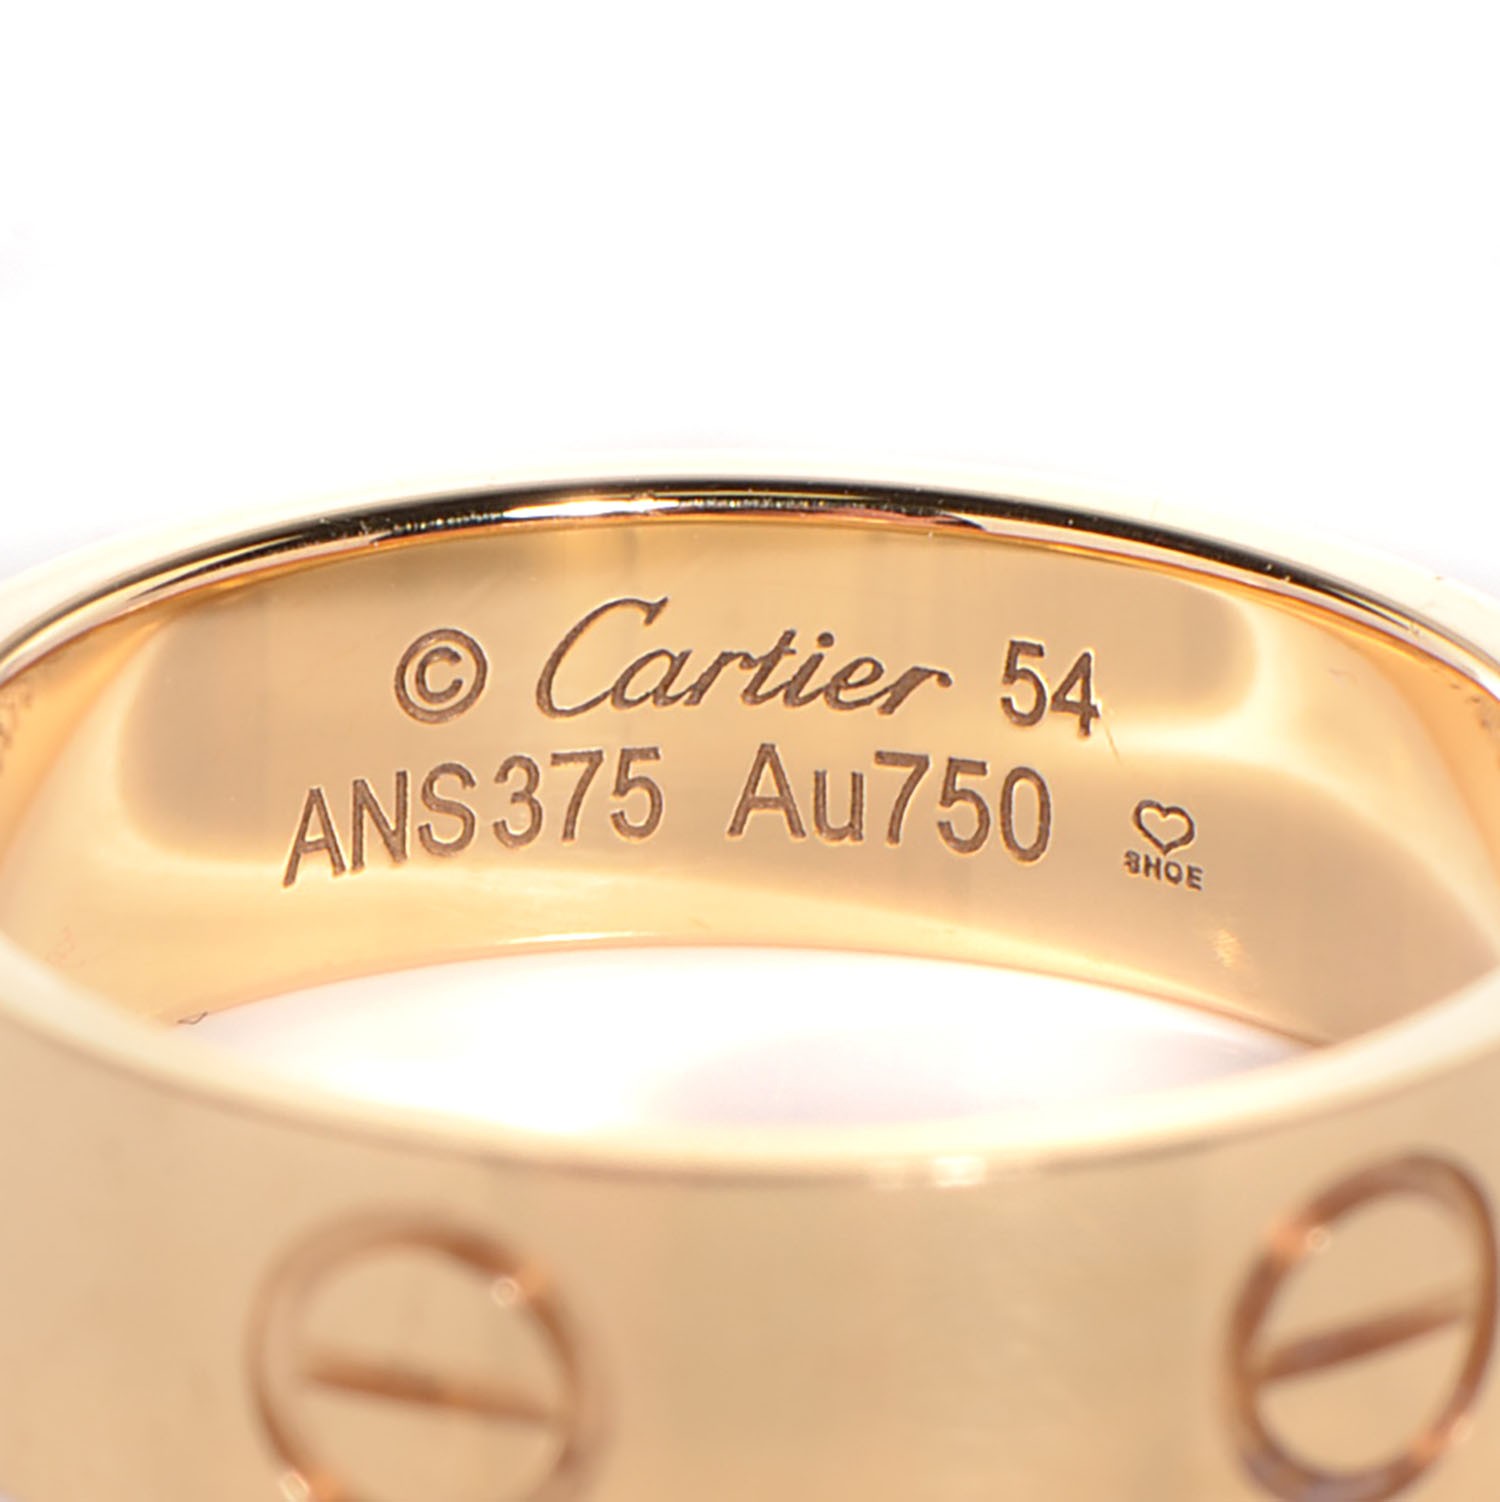 CARTIER 18K Yellow Gold 5.5mm LOVE Ring 